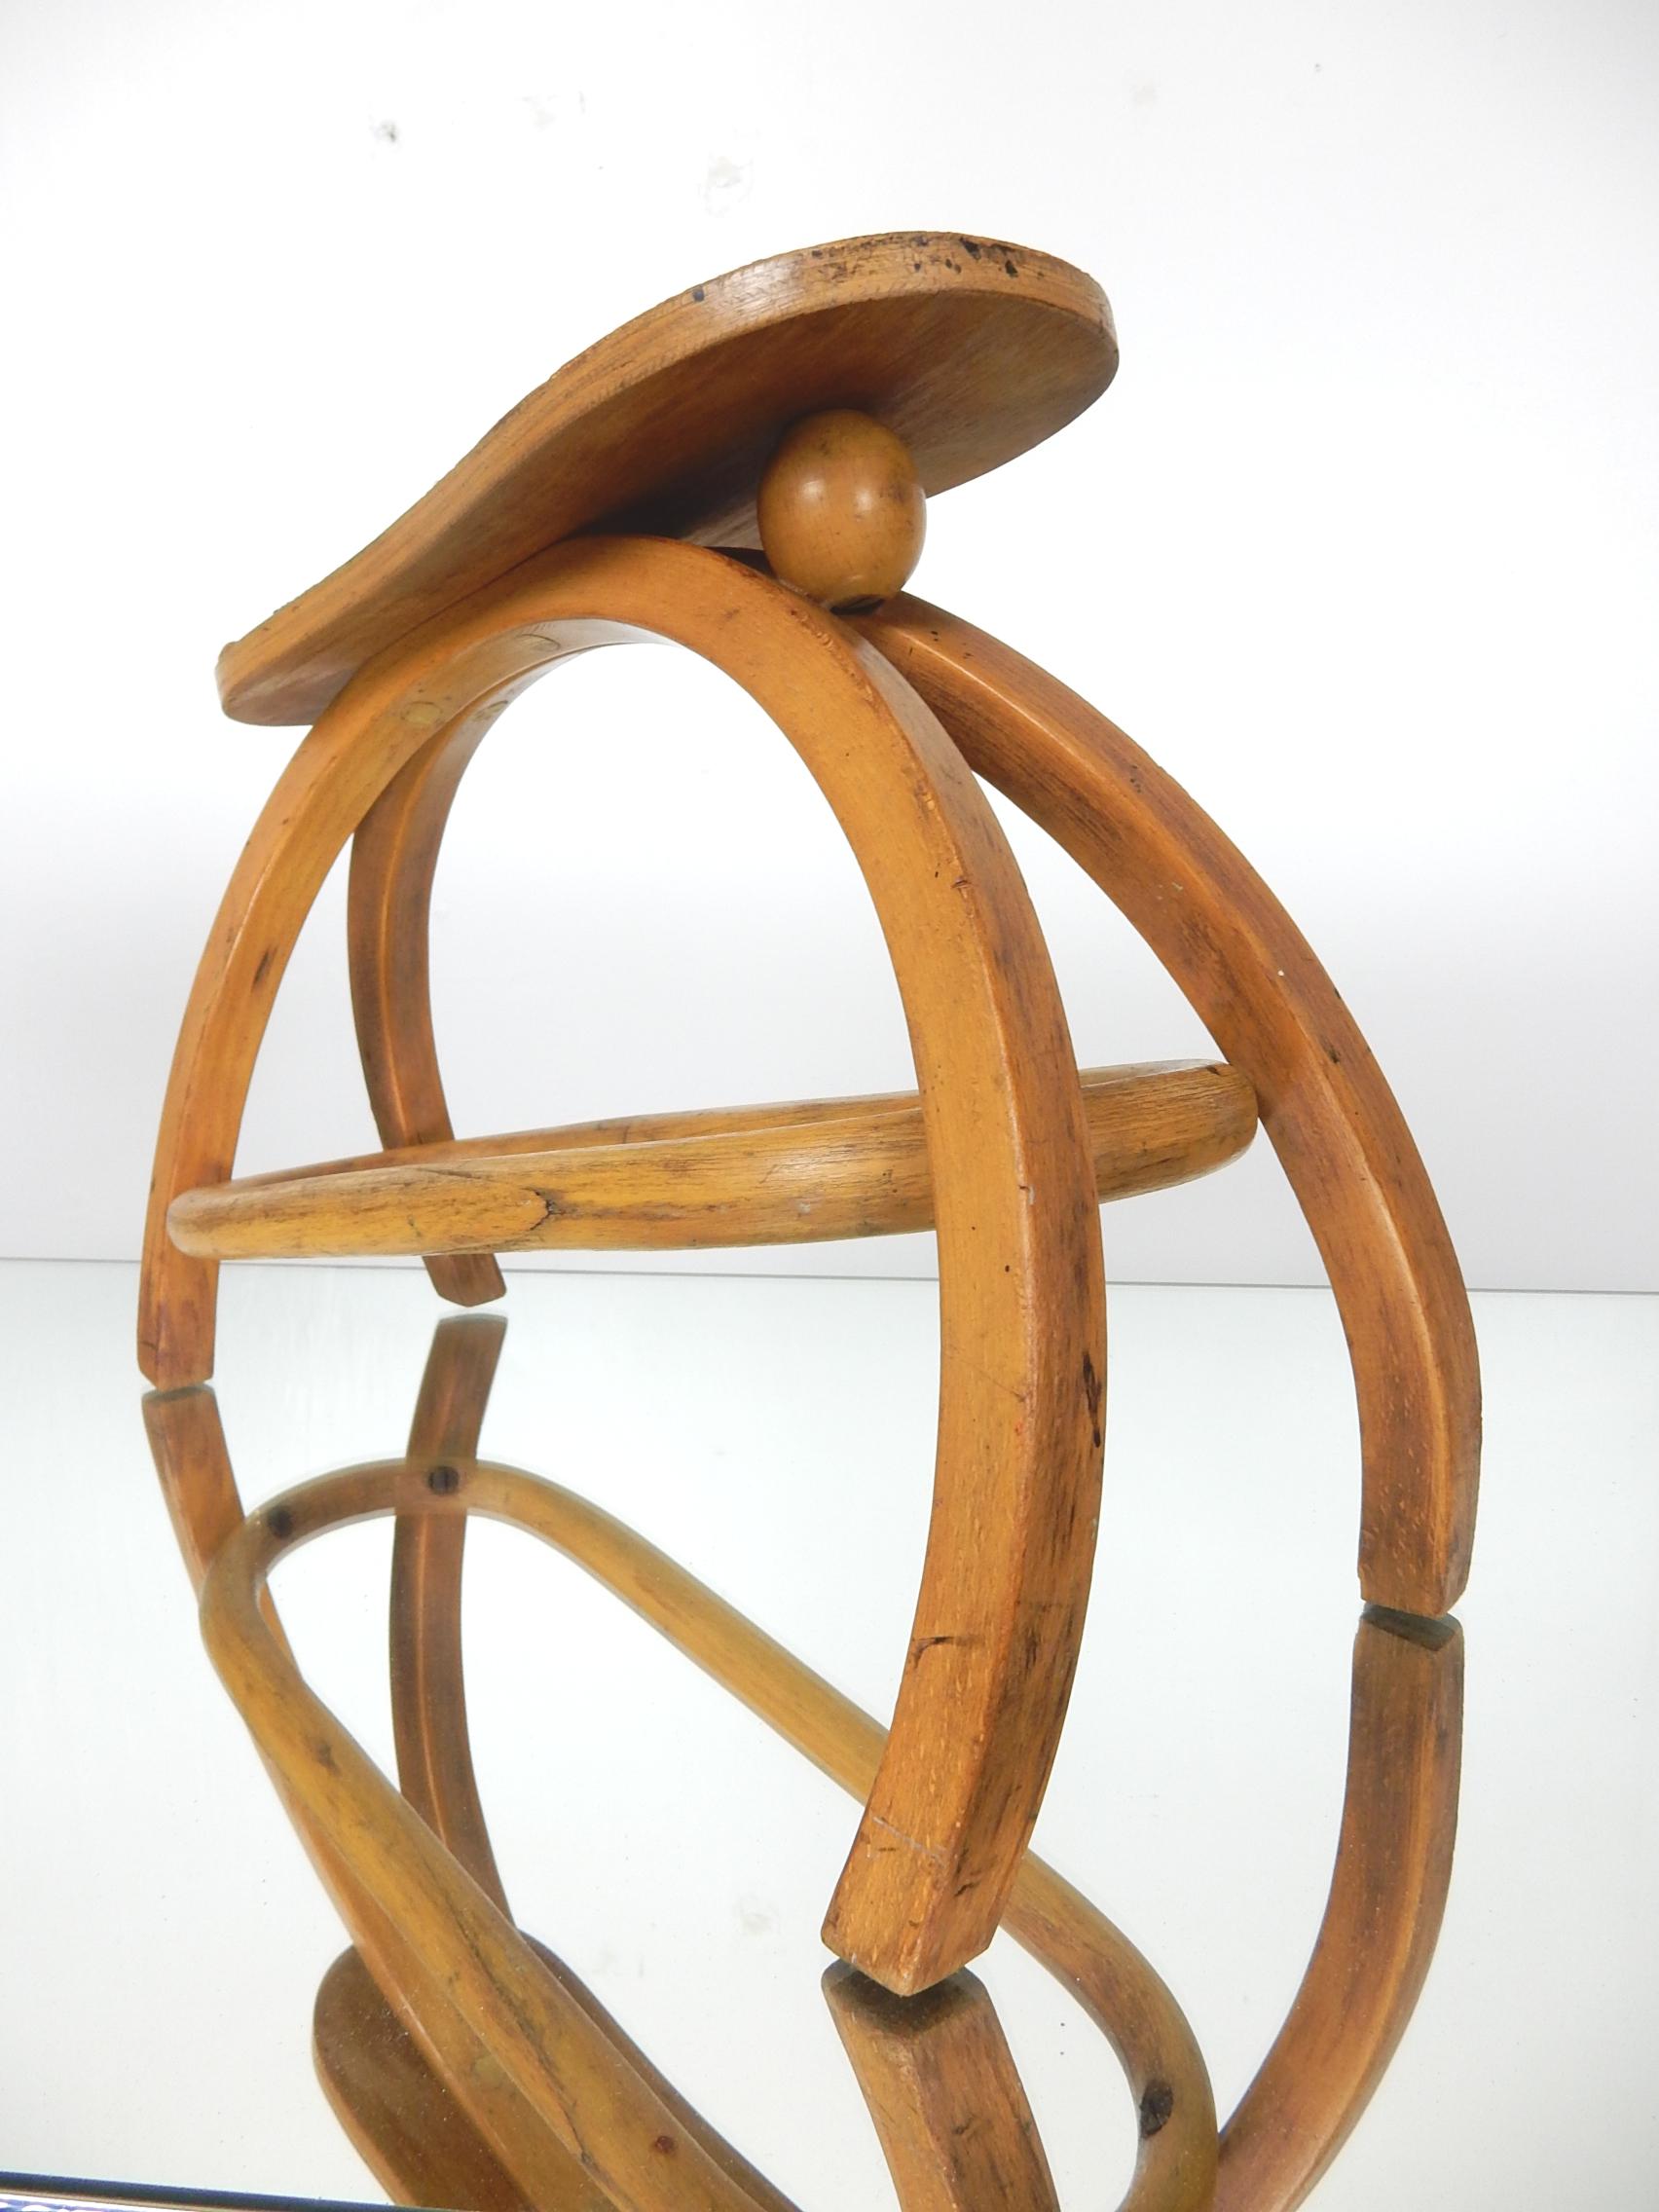 Rare Vienna secession era footrest designed by Josef Hoffmann for Thonet, circa 1907.
Bentwood construction with hard rubber top.
100% original condition.